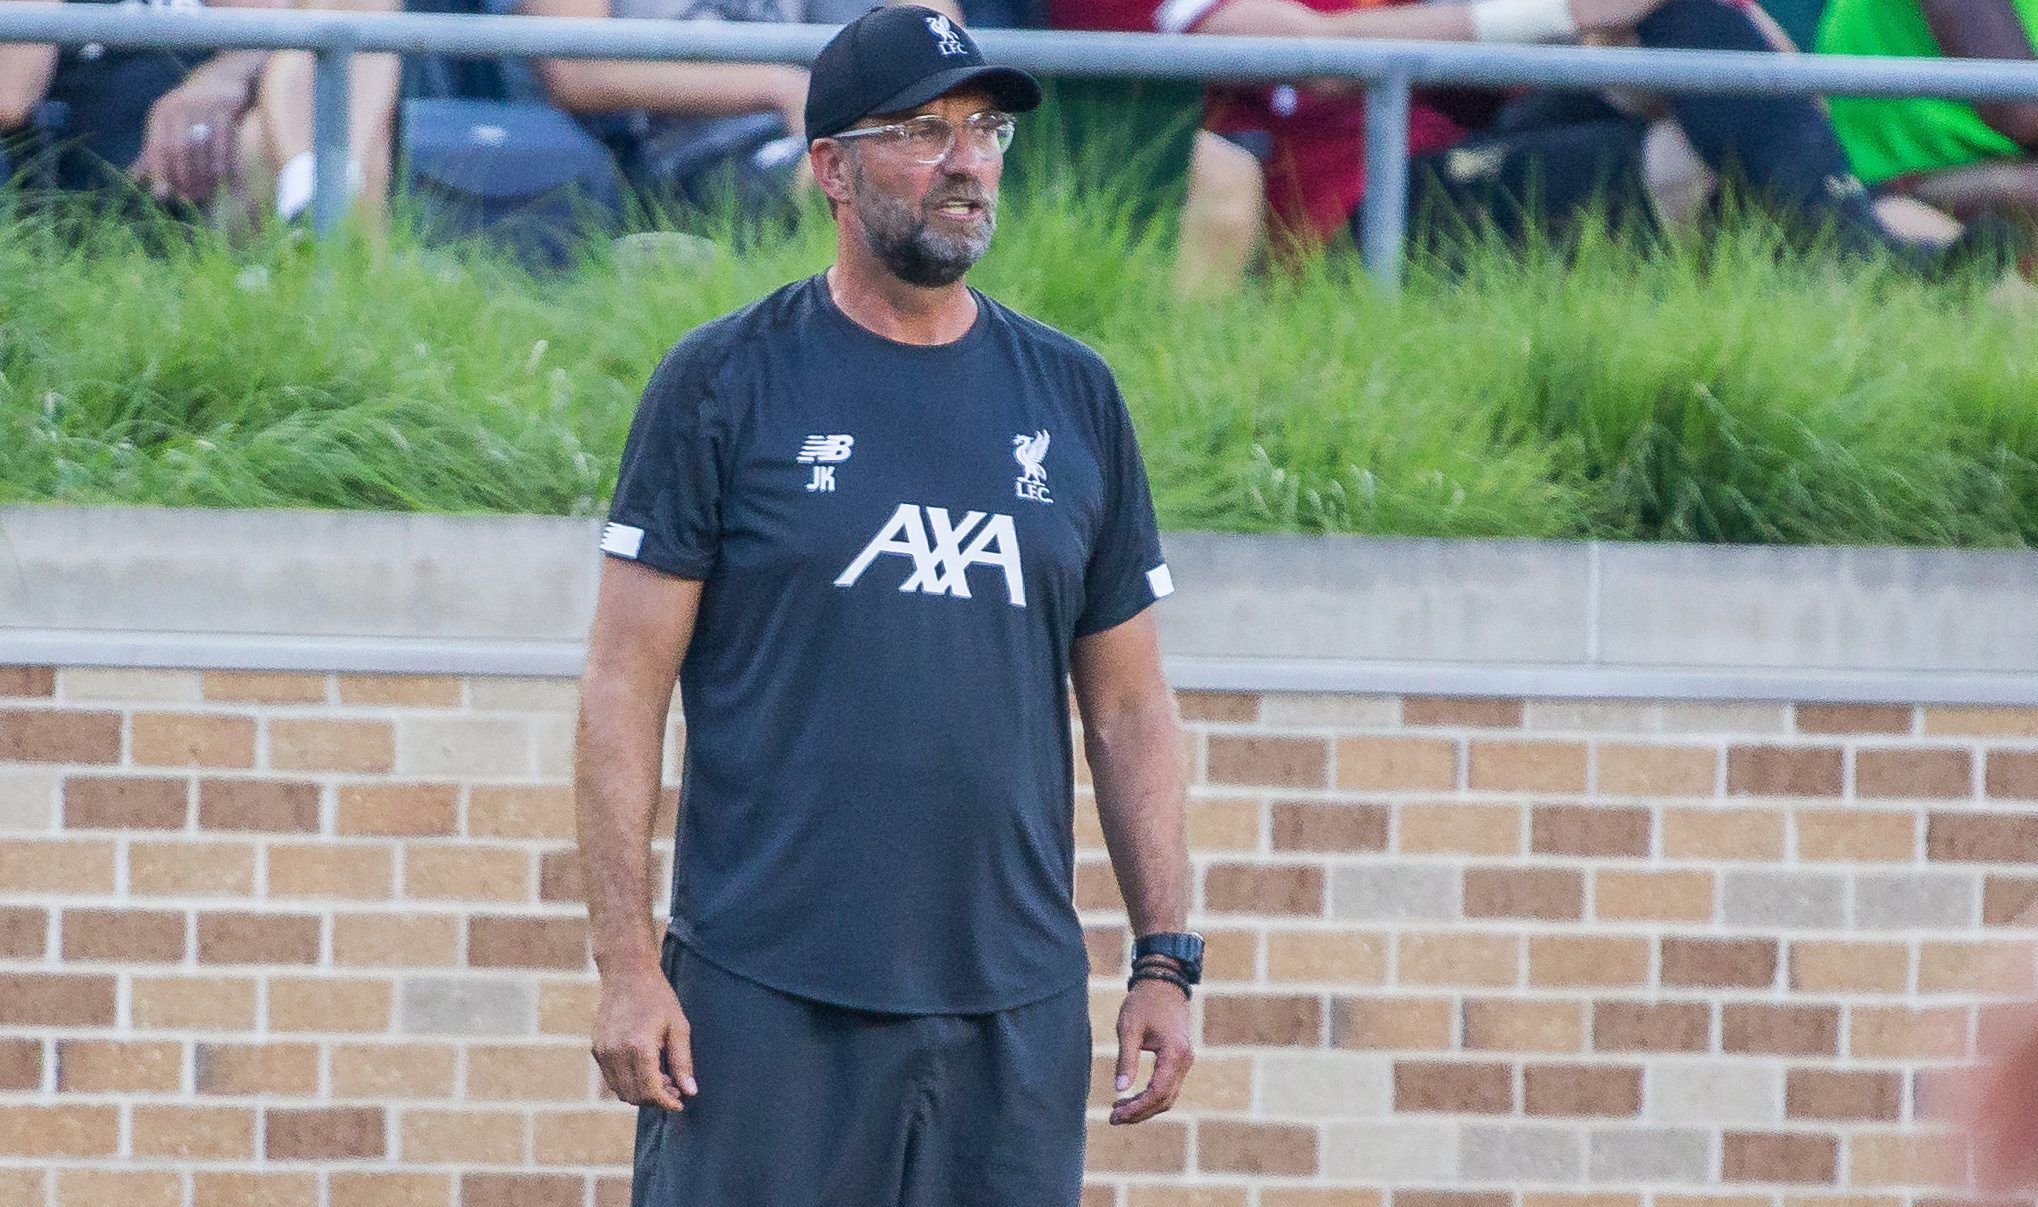 Jul 19, 2019; South Bend, IN, USA; Liverpool head coach Jurgan Klopp on the sideline in the first half of a preseason preparation soccer match against the Borussia Dortmund at Notre Dame. Mandatory Credit: Trevor Ruszkowski-USA TODAY Sports